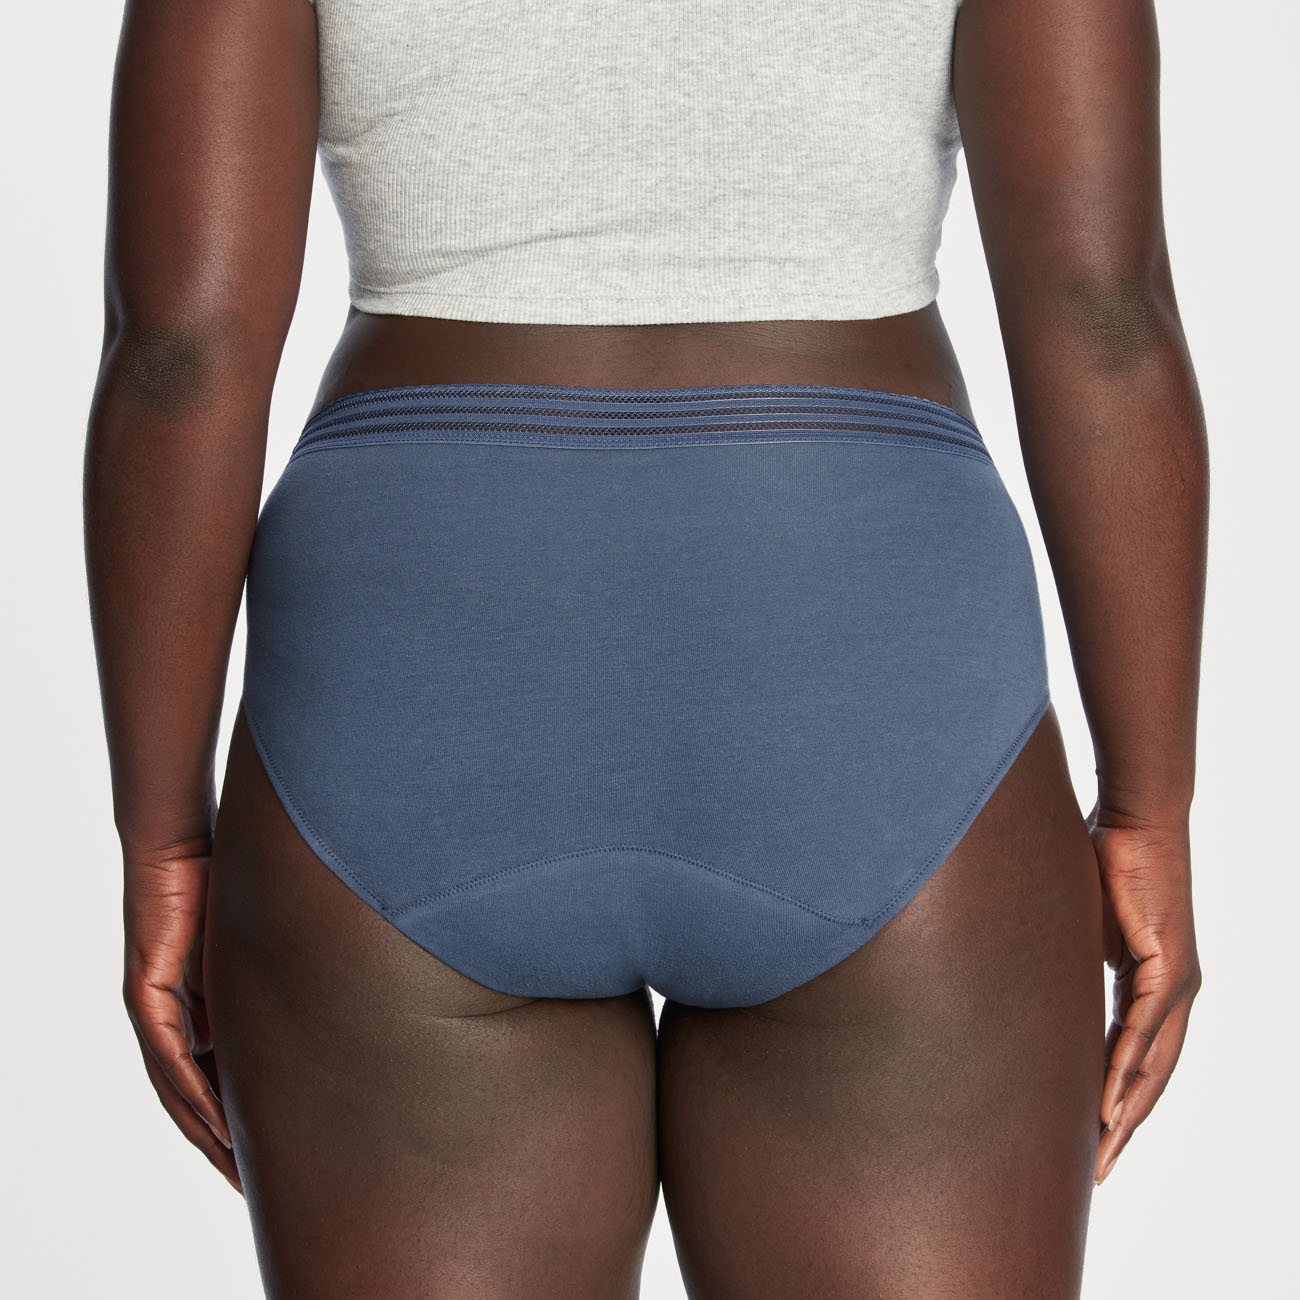 Thinx - TFA - Everyday Comfort Lace Brief - Storm - Back